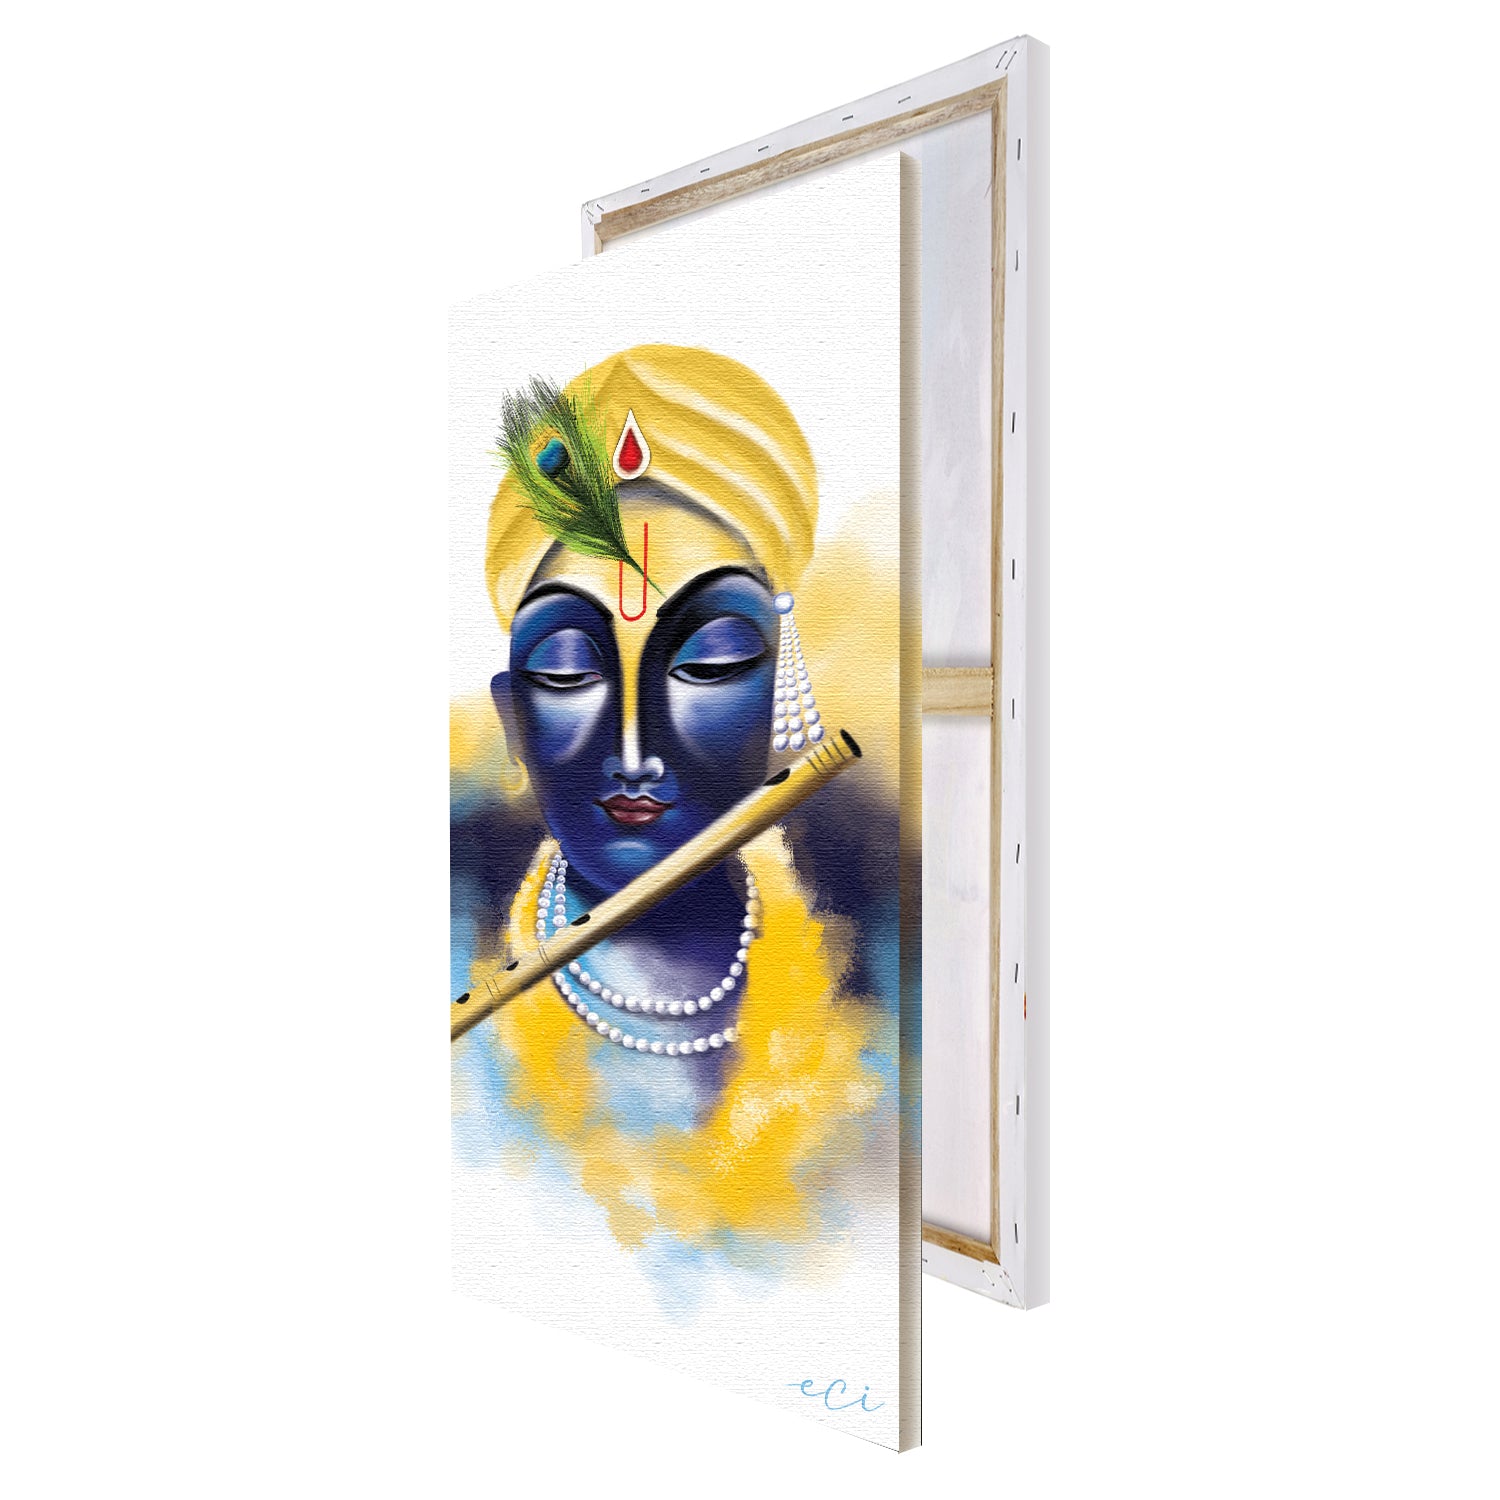 Lord Krishna Playing Flute Painting On Canvas Digital Printed Religious Wall Art 4